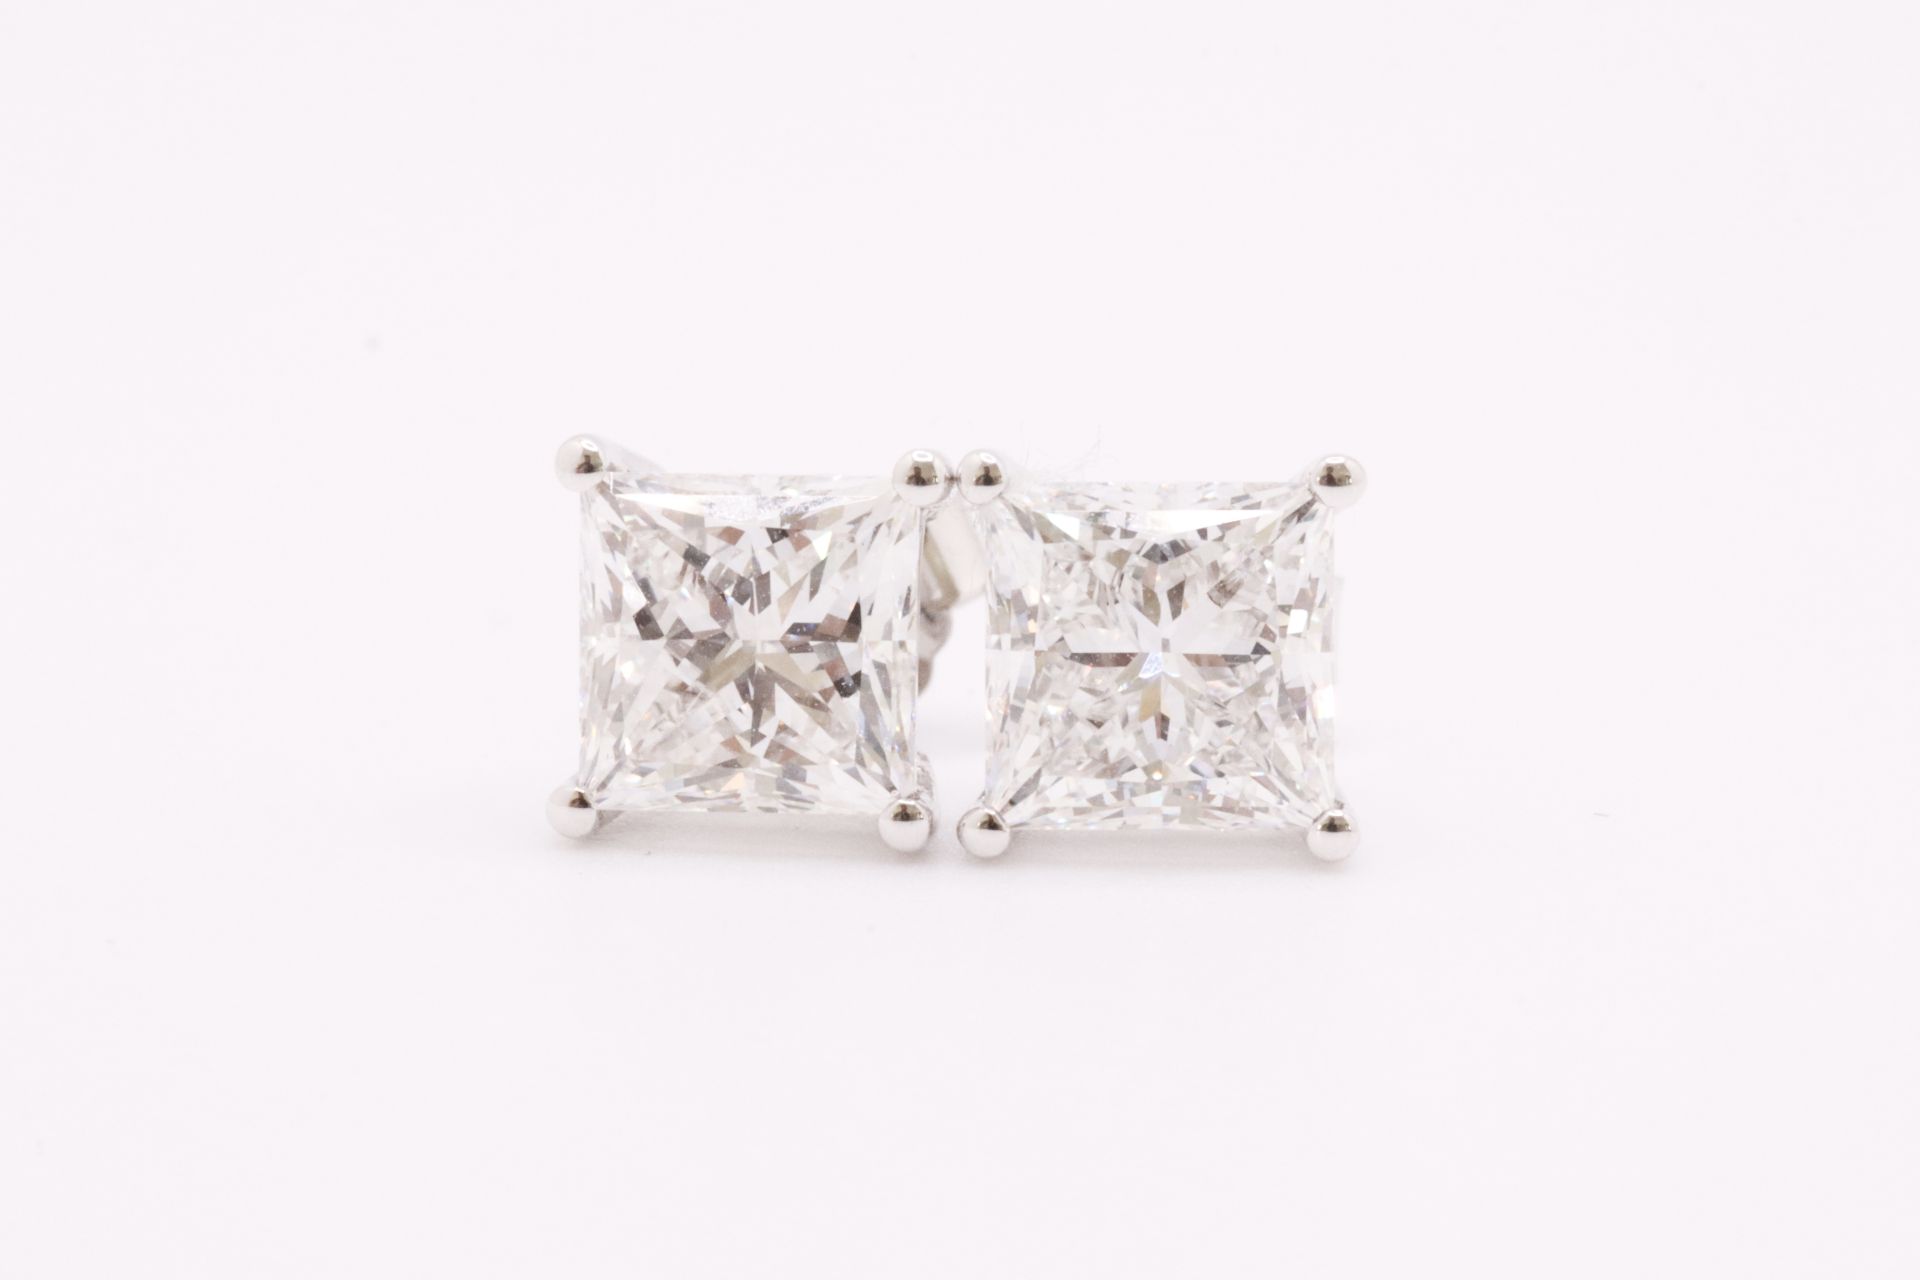 ** ON SALE ** Princess Cut 5.00 Carat Diamond Earrings Set in 18kt White Gold - F Colour SI Clarity